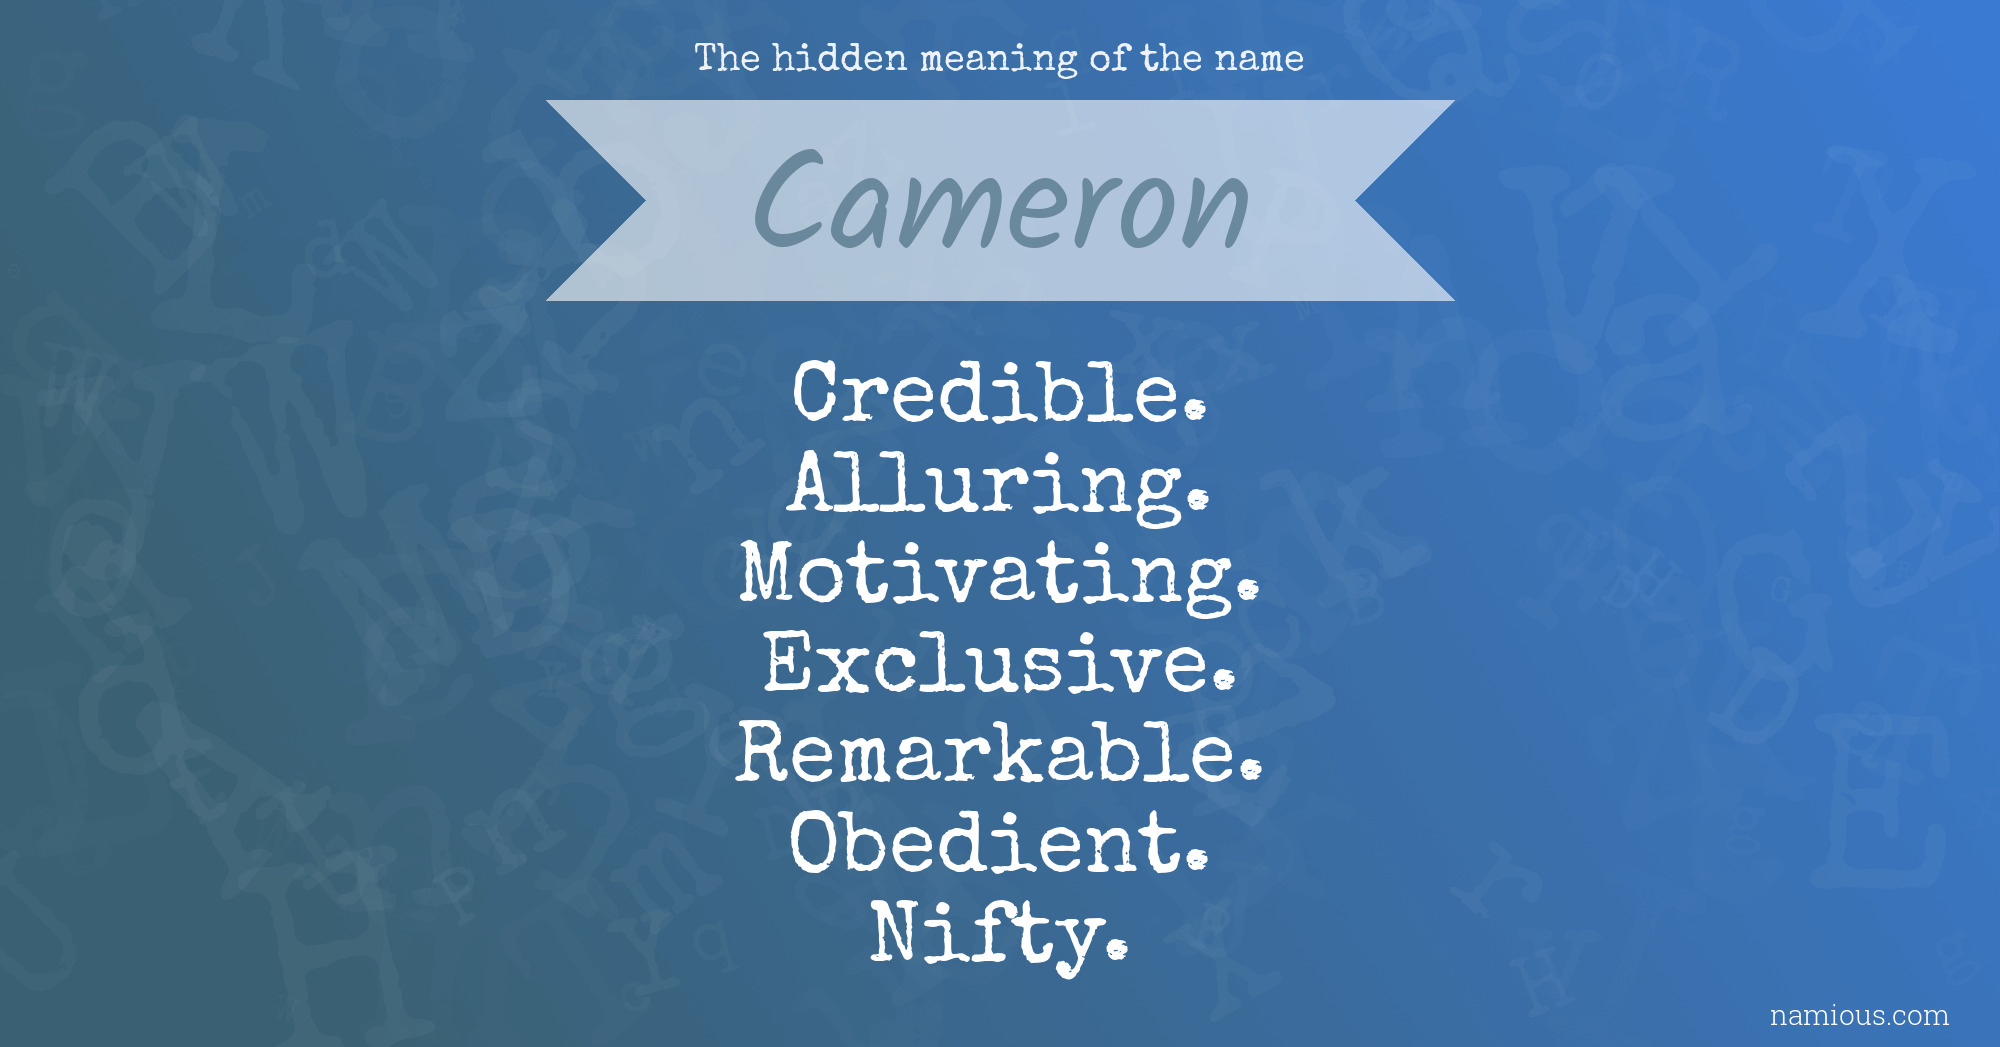 The hidden meaning of the name Cameron